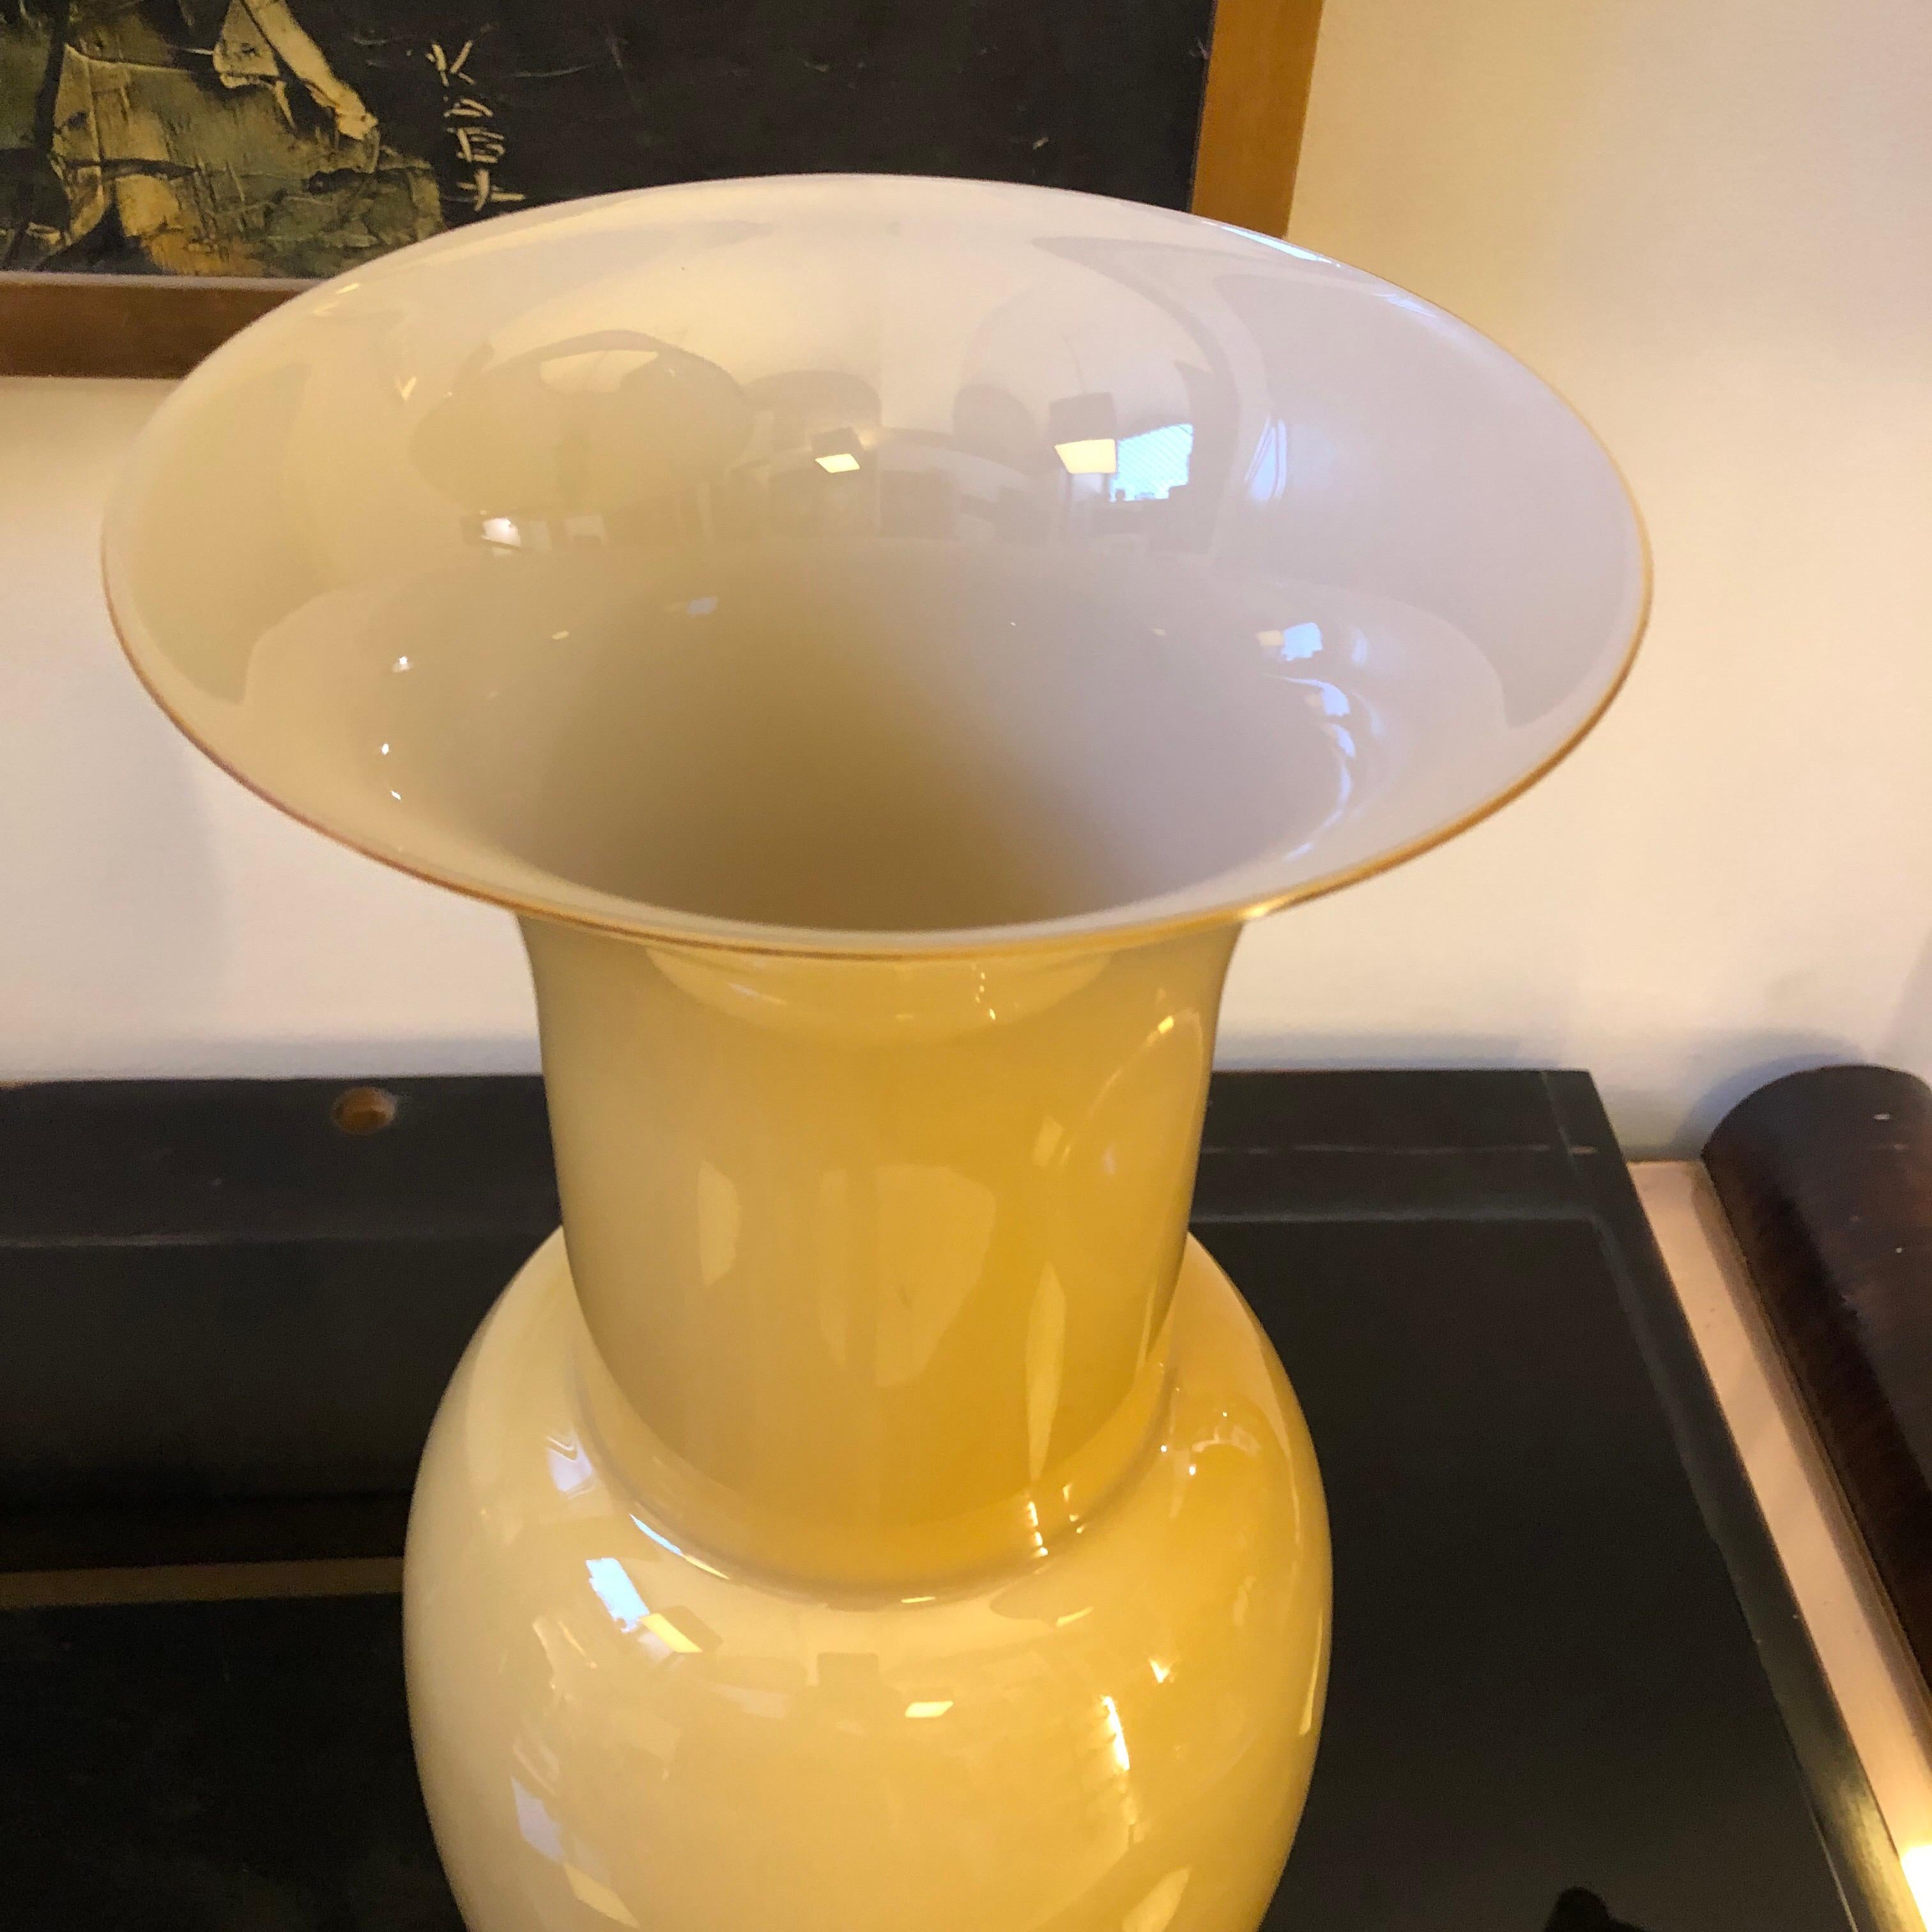 An opaline vase made in Italy in 2000 signed Aureliano Toso on the bottom in perfect conditions.